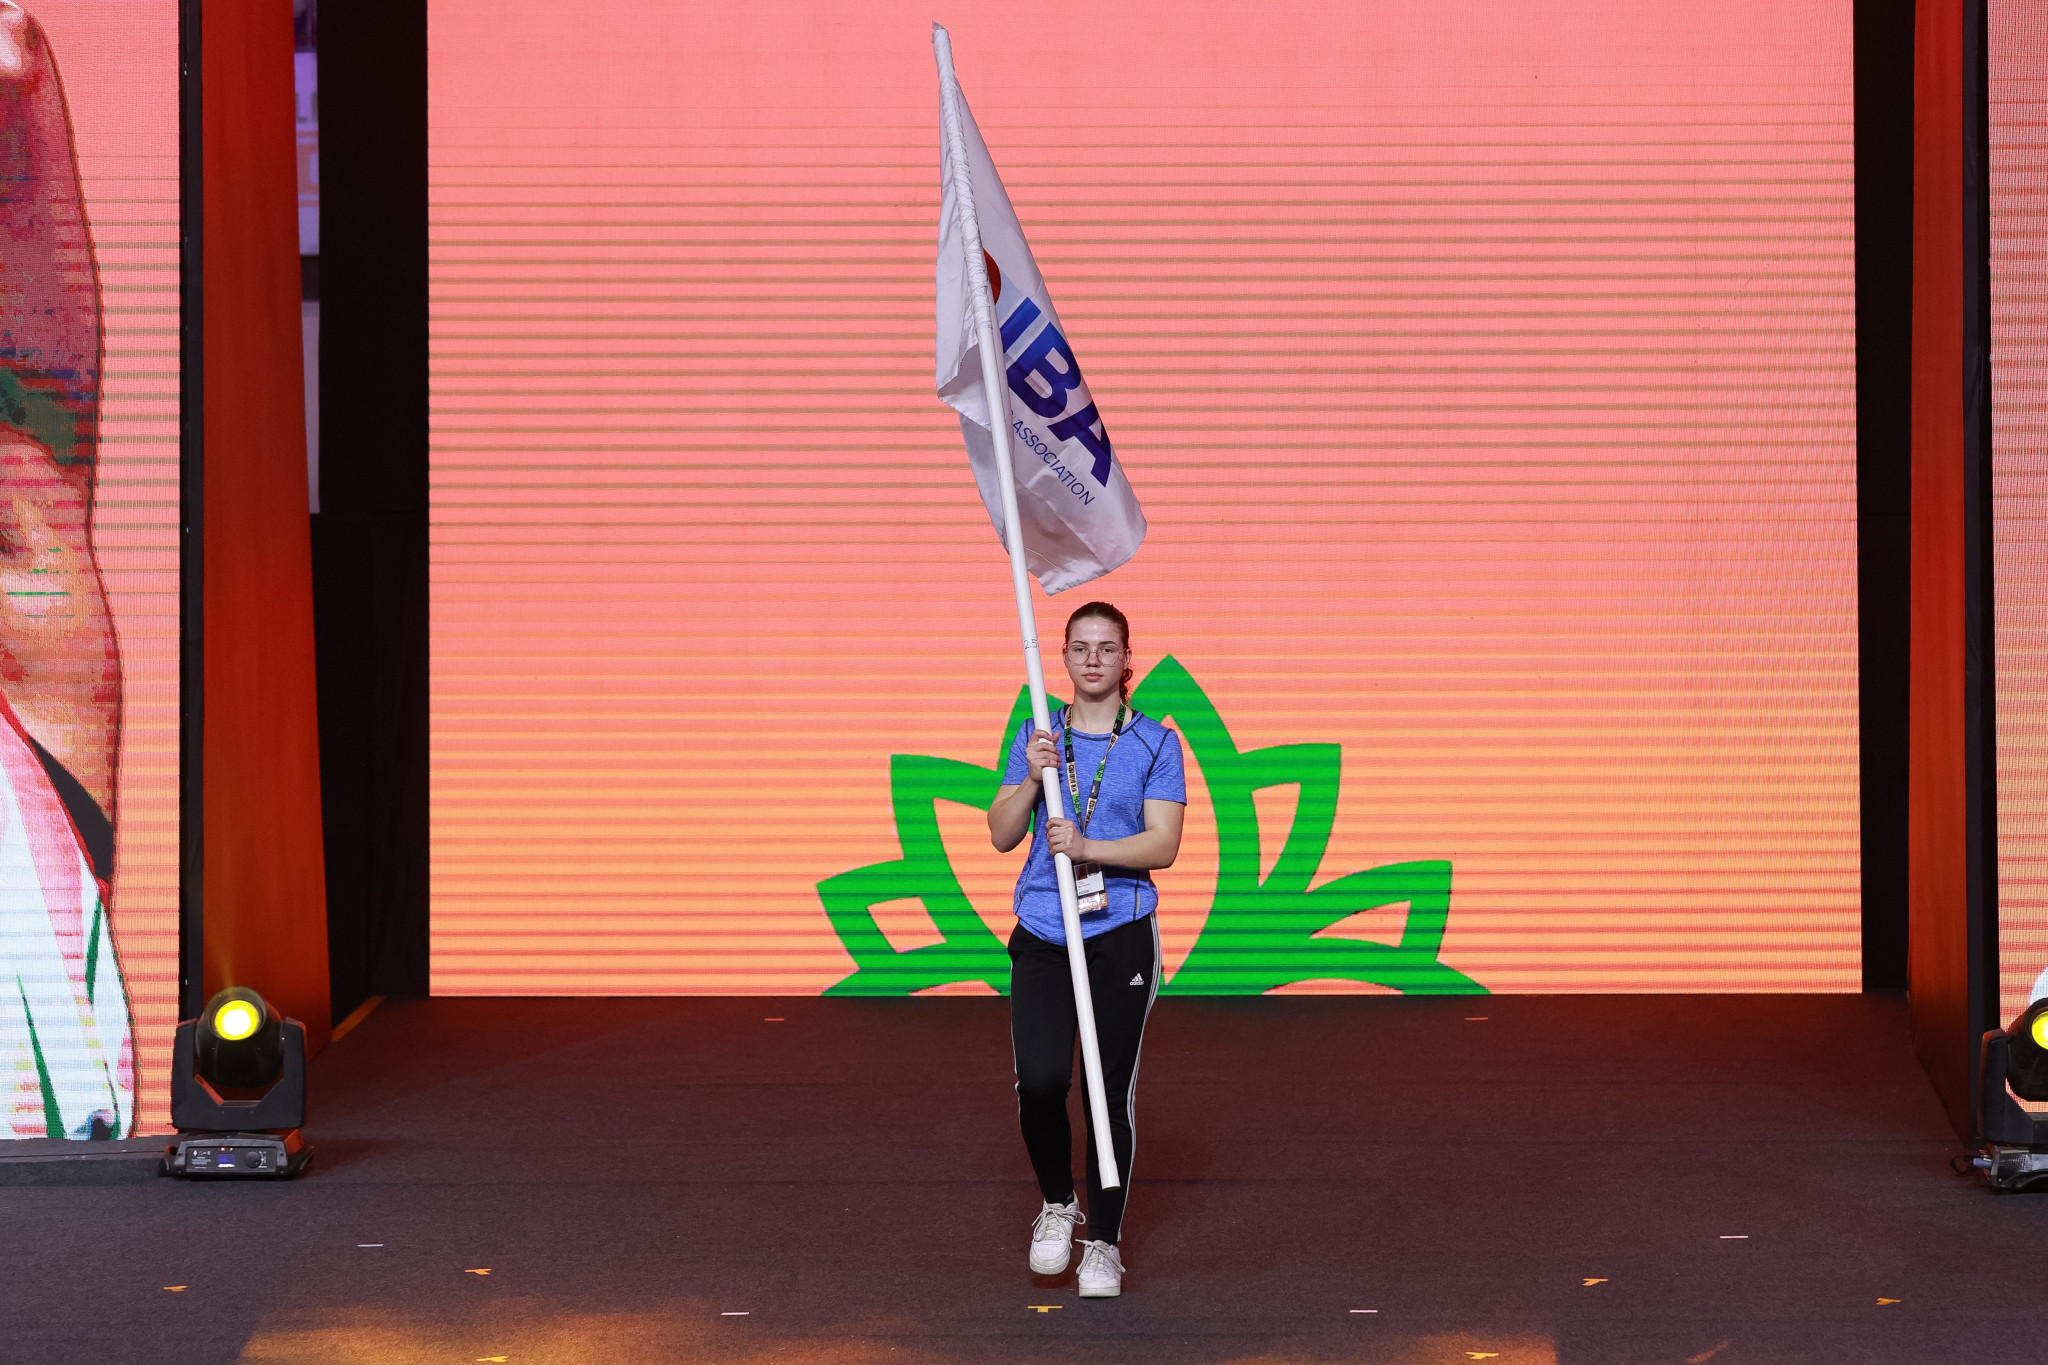 The IBA has welcomed athletes who are from National Federations that have quit the global governing body to participate after Dutch boxer Megan de Cler competed under a neutral flag at the Women's World Championships earlier this year ©IBA